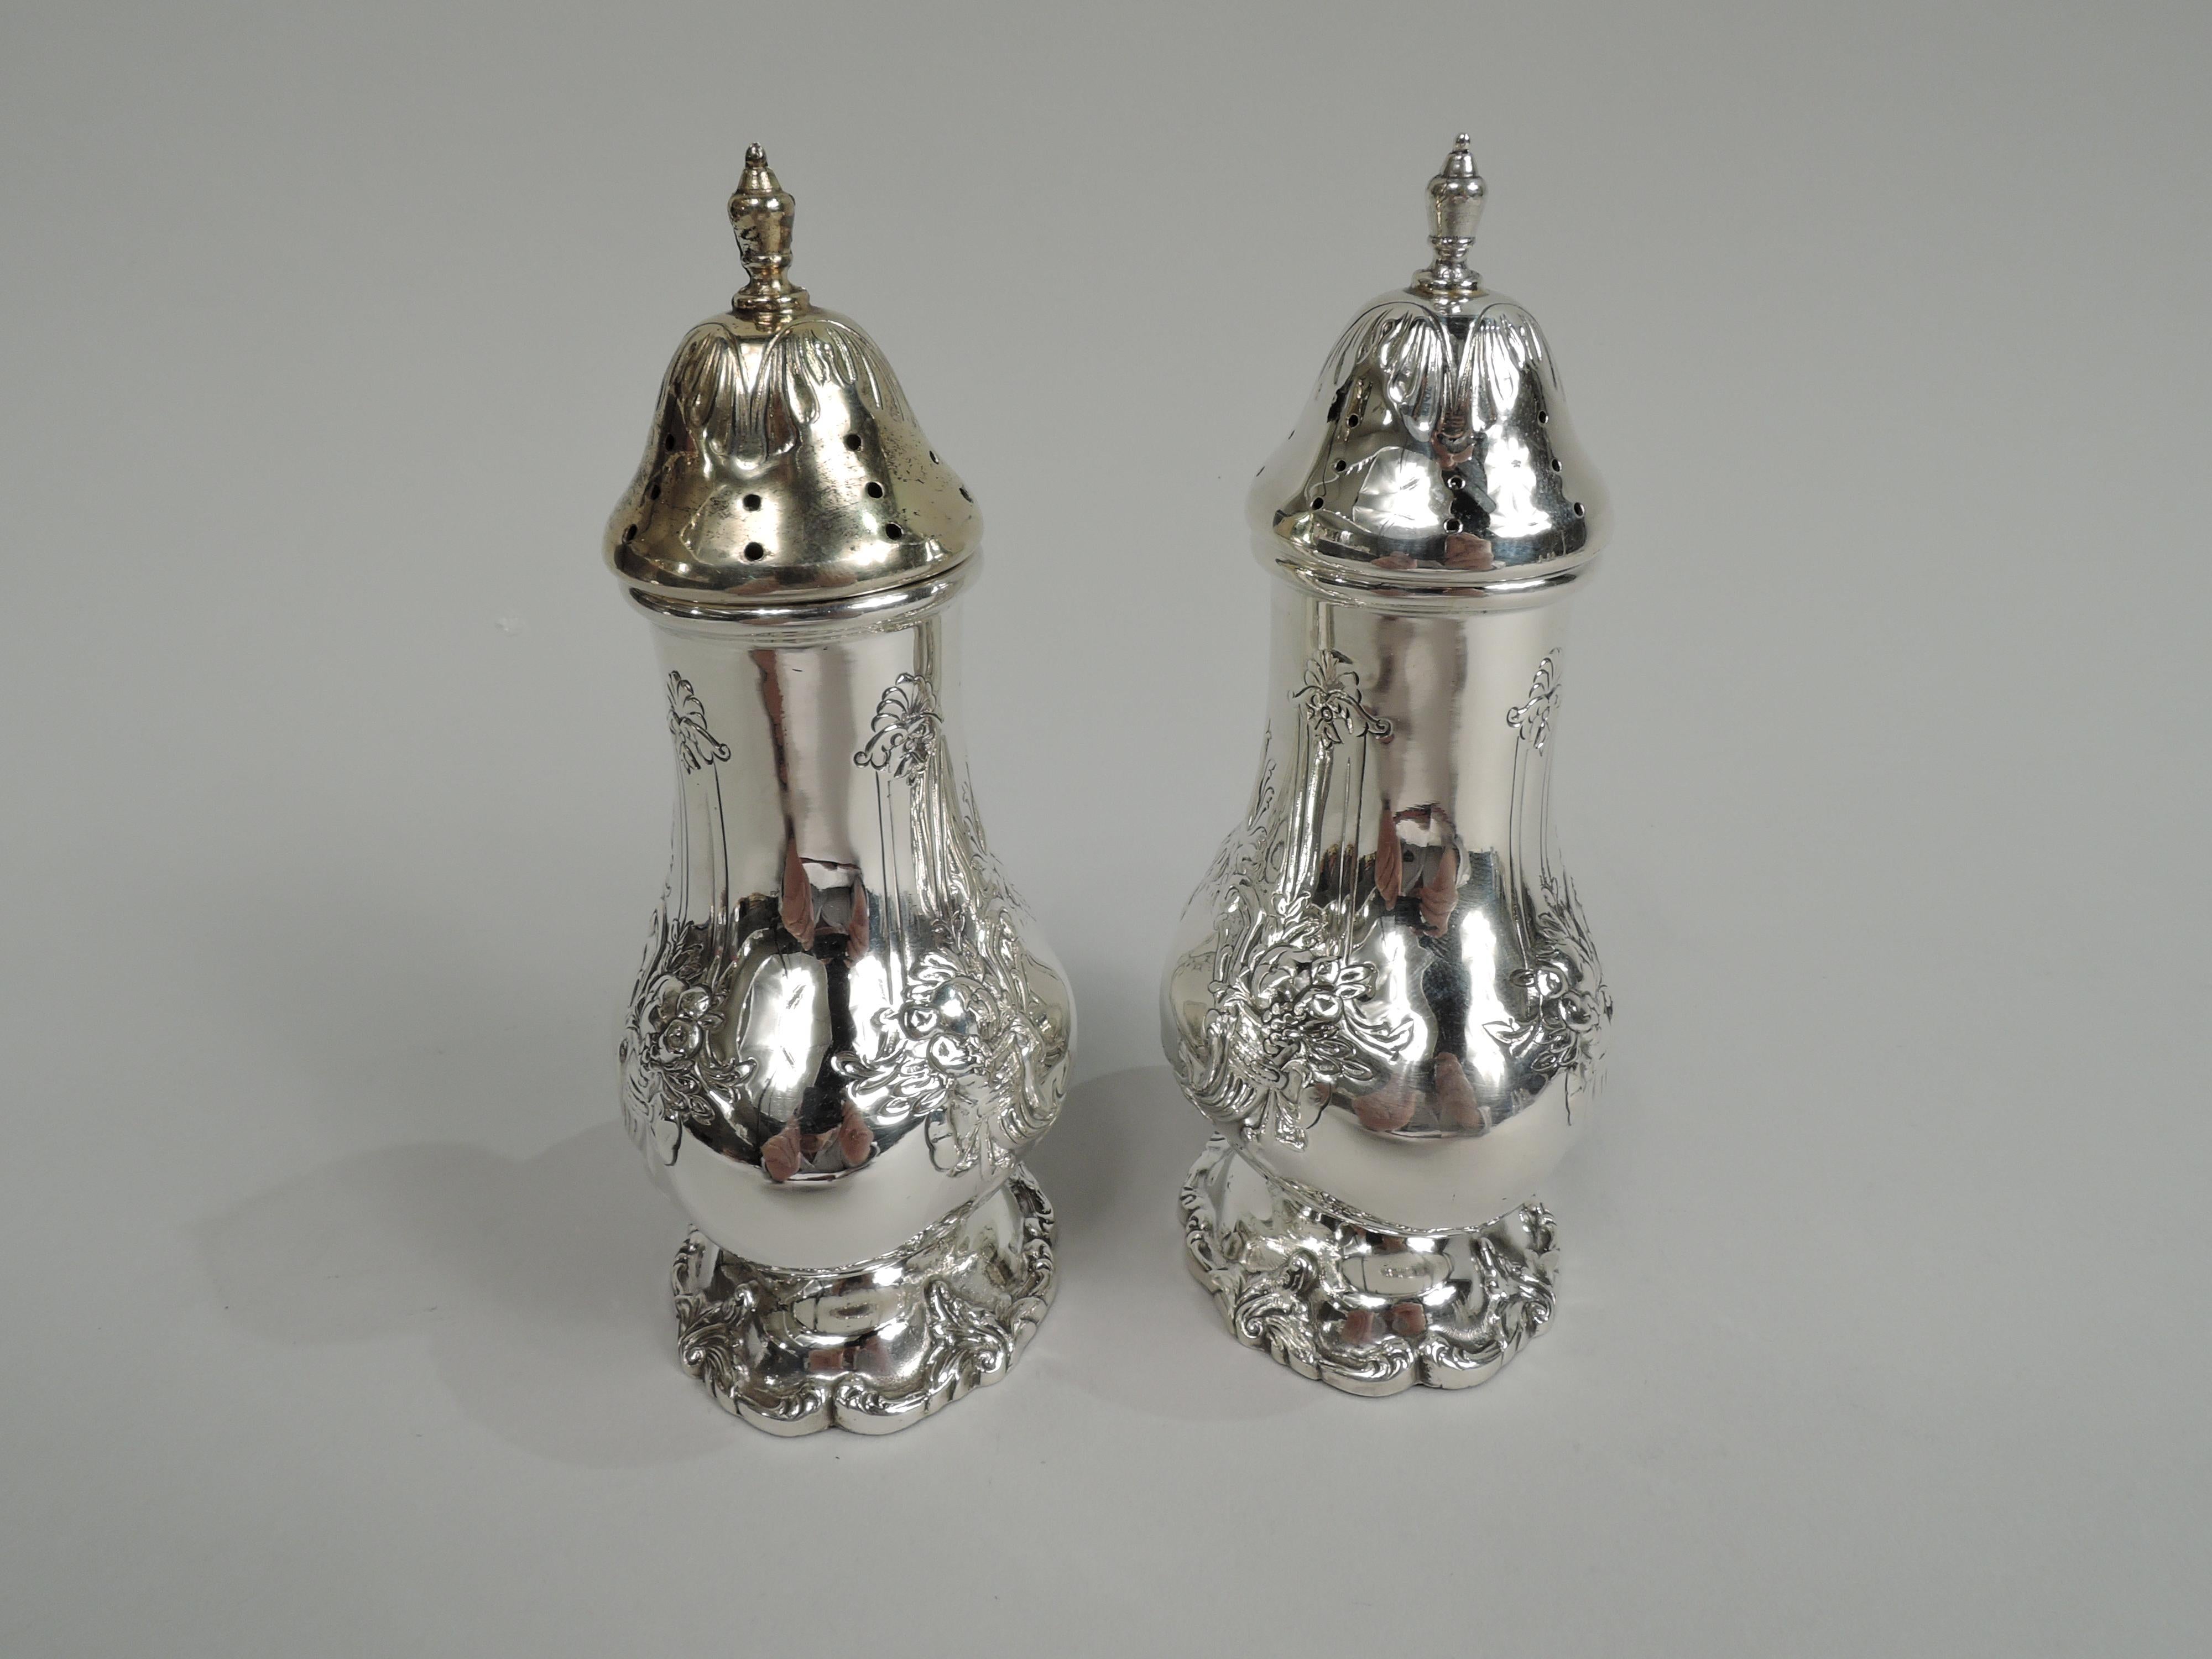 Pair of Francis I sterling silver salt and pepper shakers. Made by Reed & Barton in Taunton, Mass. Each: Oval and bellied on raised foot. Cover domed and pierced with vasiform finial; one cover gilt. On front and back are chased strapwork cartouches